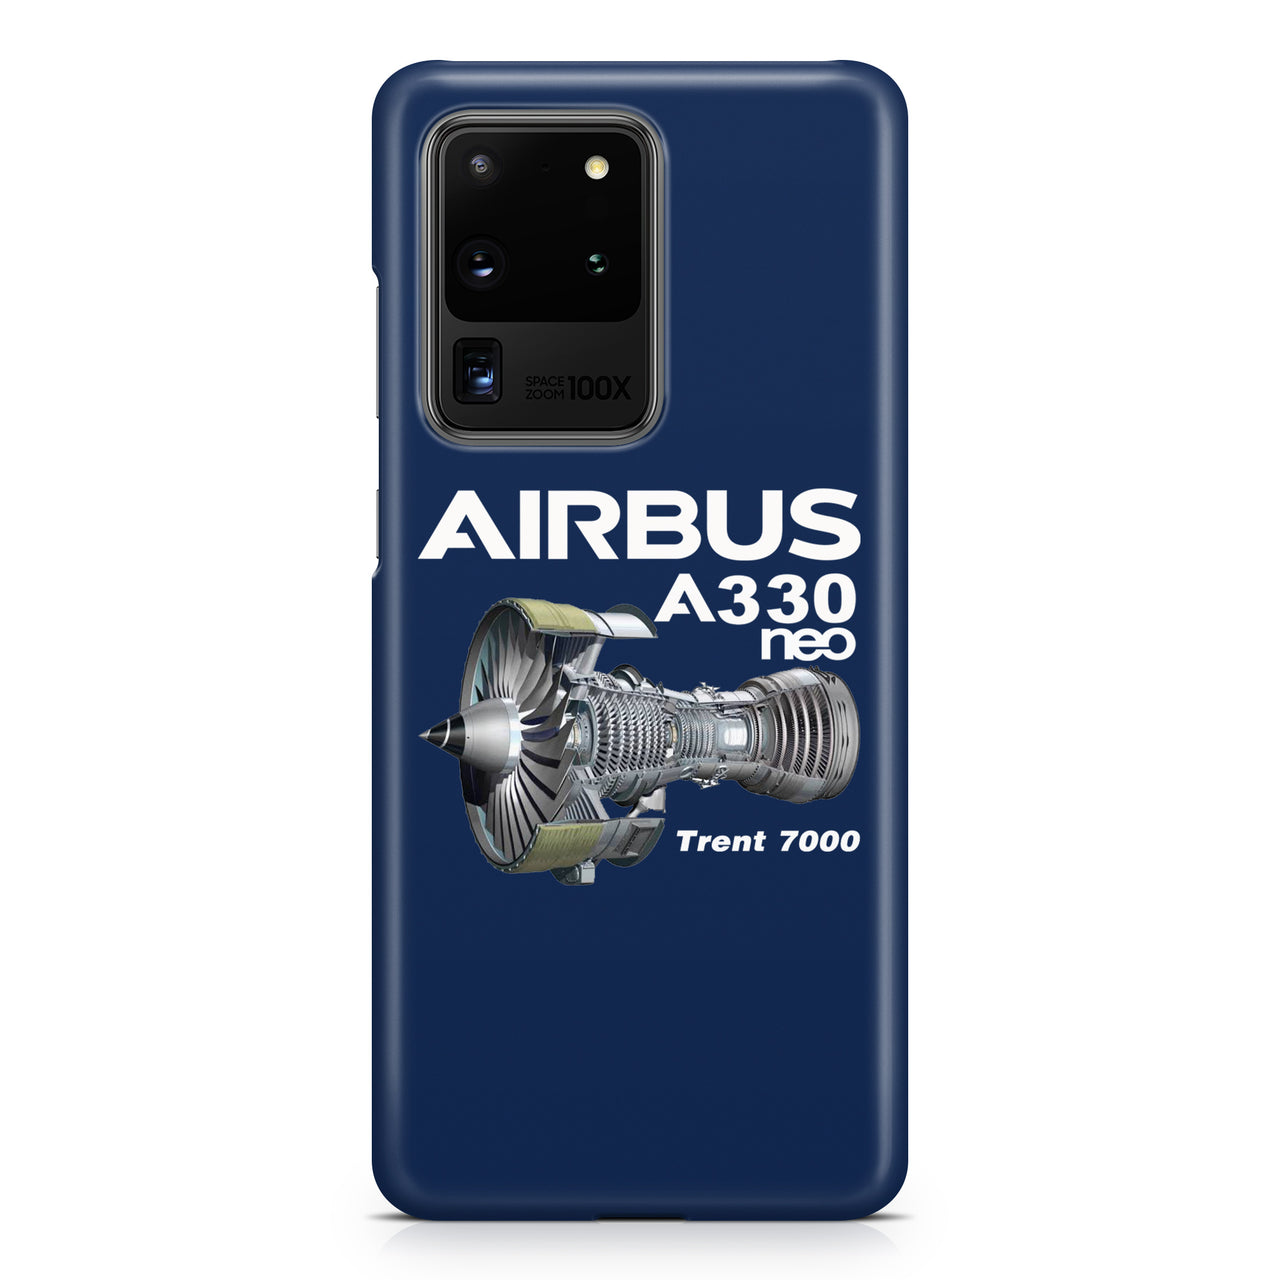 Airbus A330neo & Trent 7000 Samsung A Cases